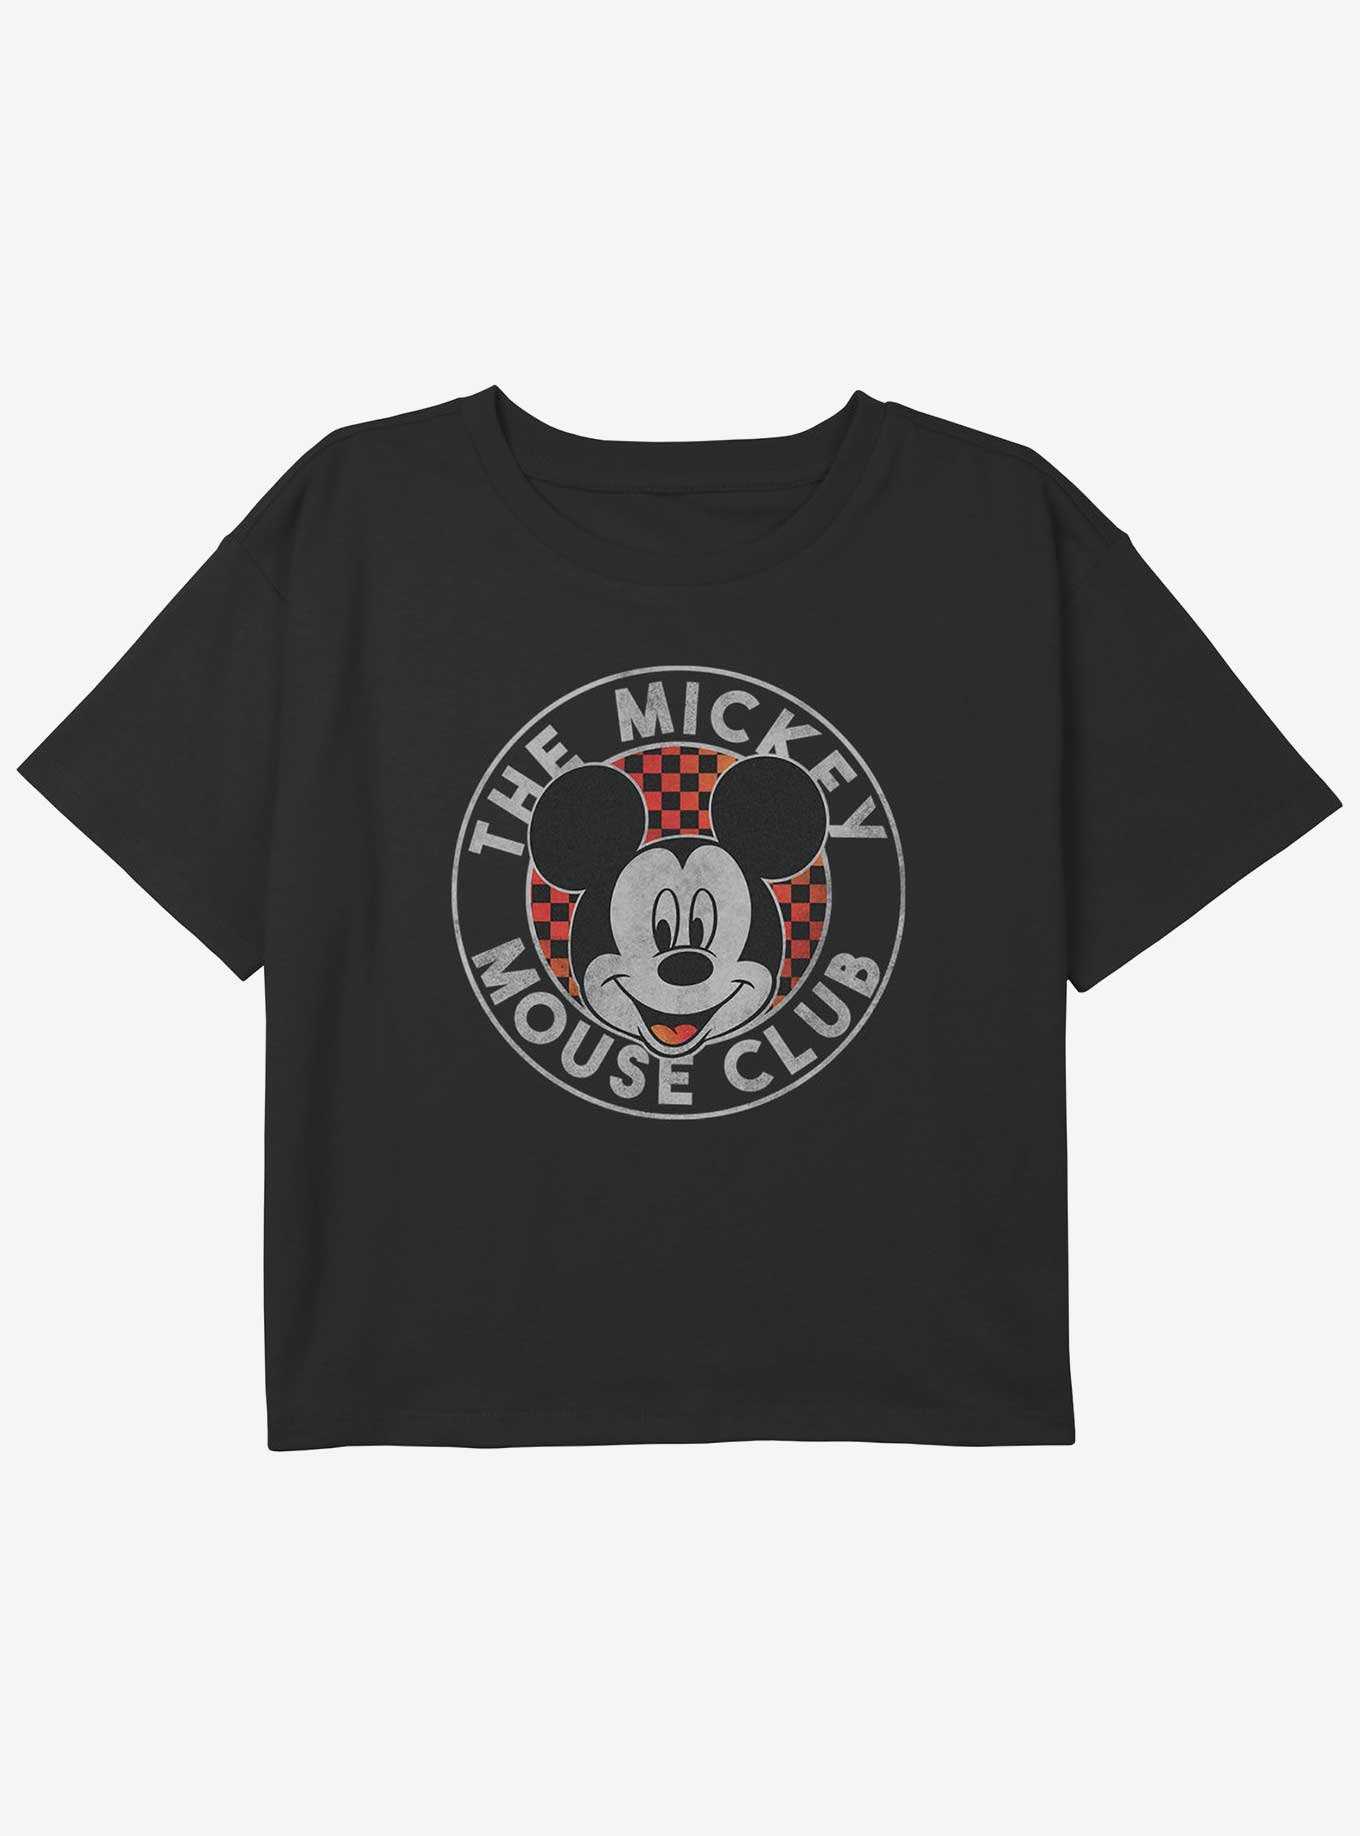 Disney Mickey Mouse The Mickey Mouse Club Girls Youth Crop T-Shirt, , hi-res